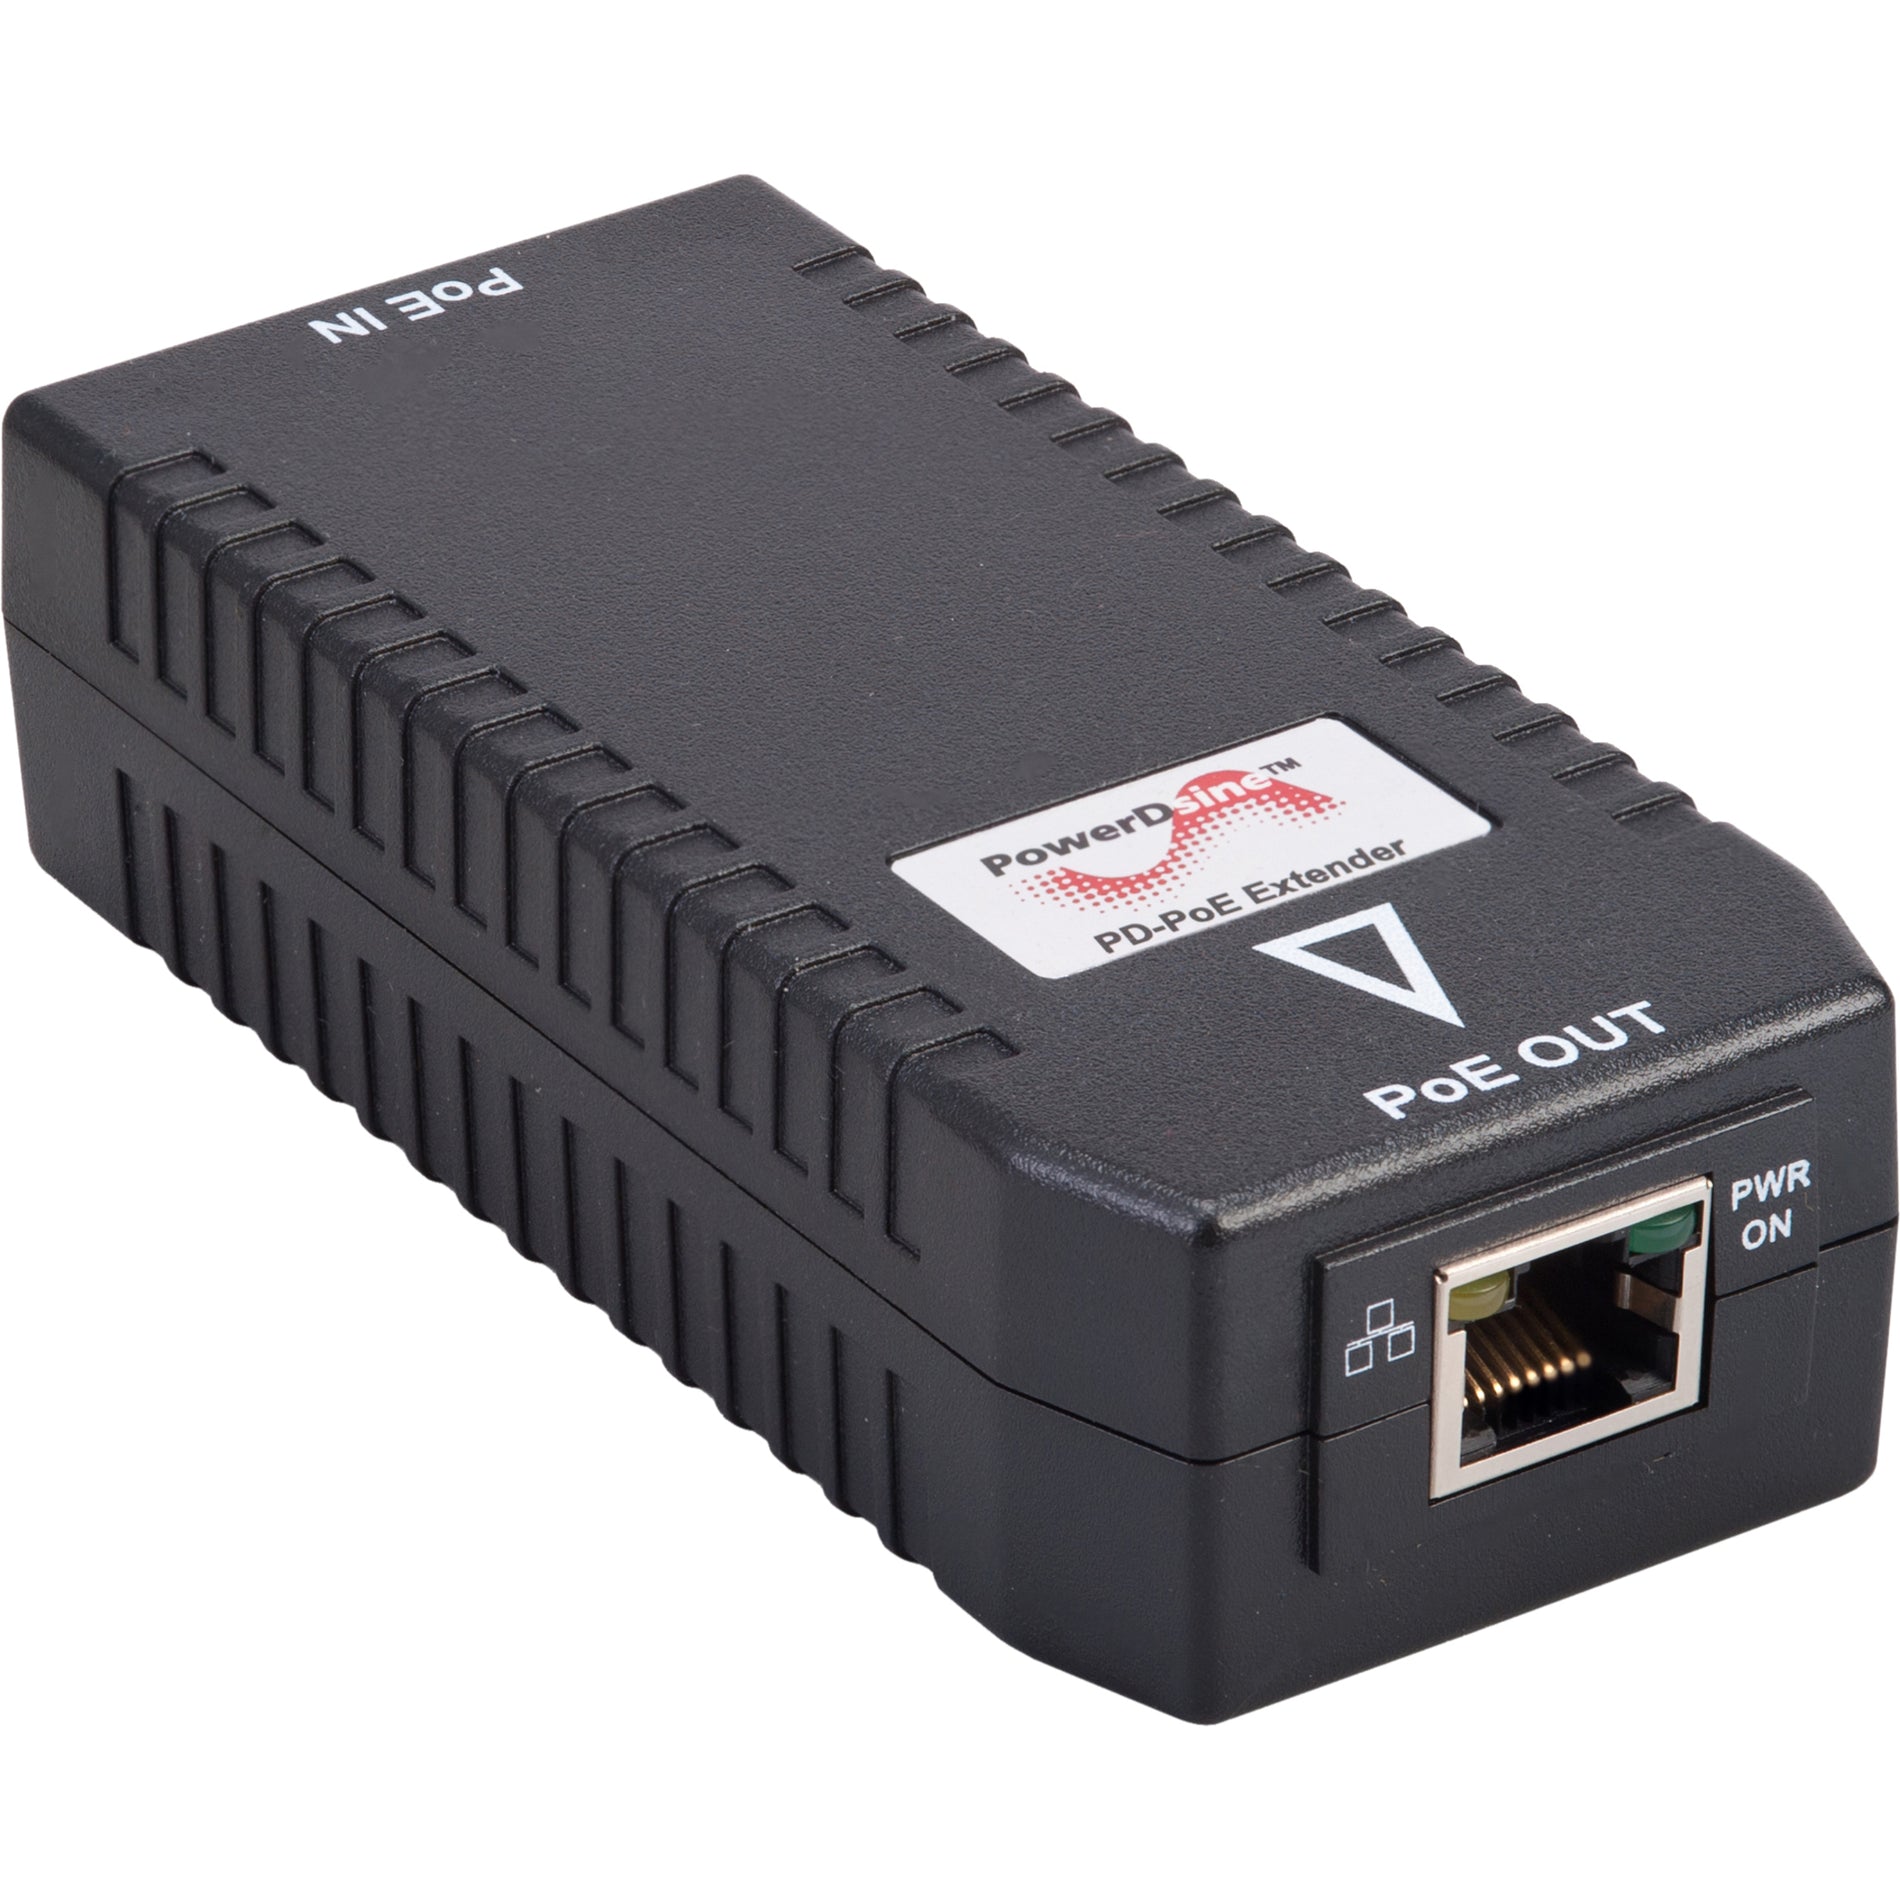 Microchip PD-PoE-Extender Extends PoE Network Range Up To 500 meters, Plug and Play Installation